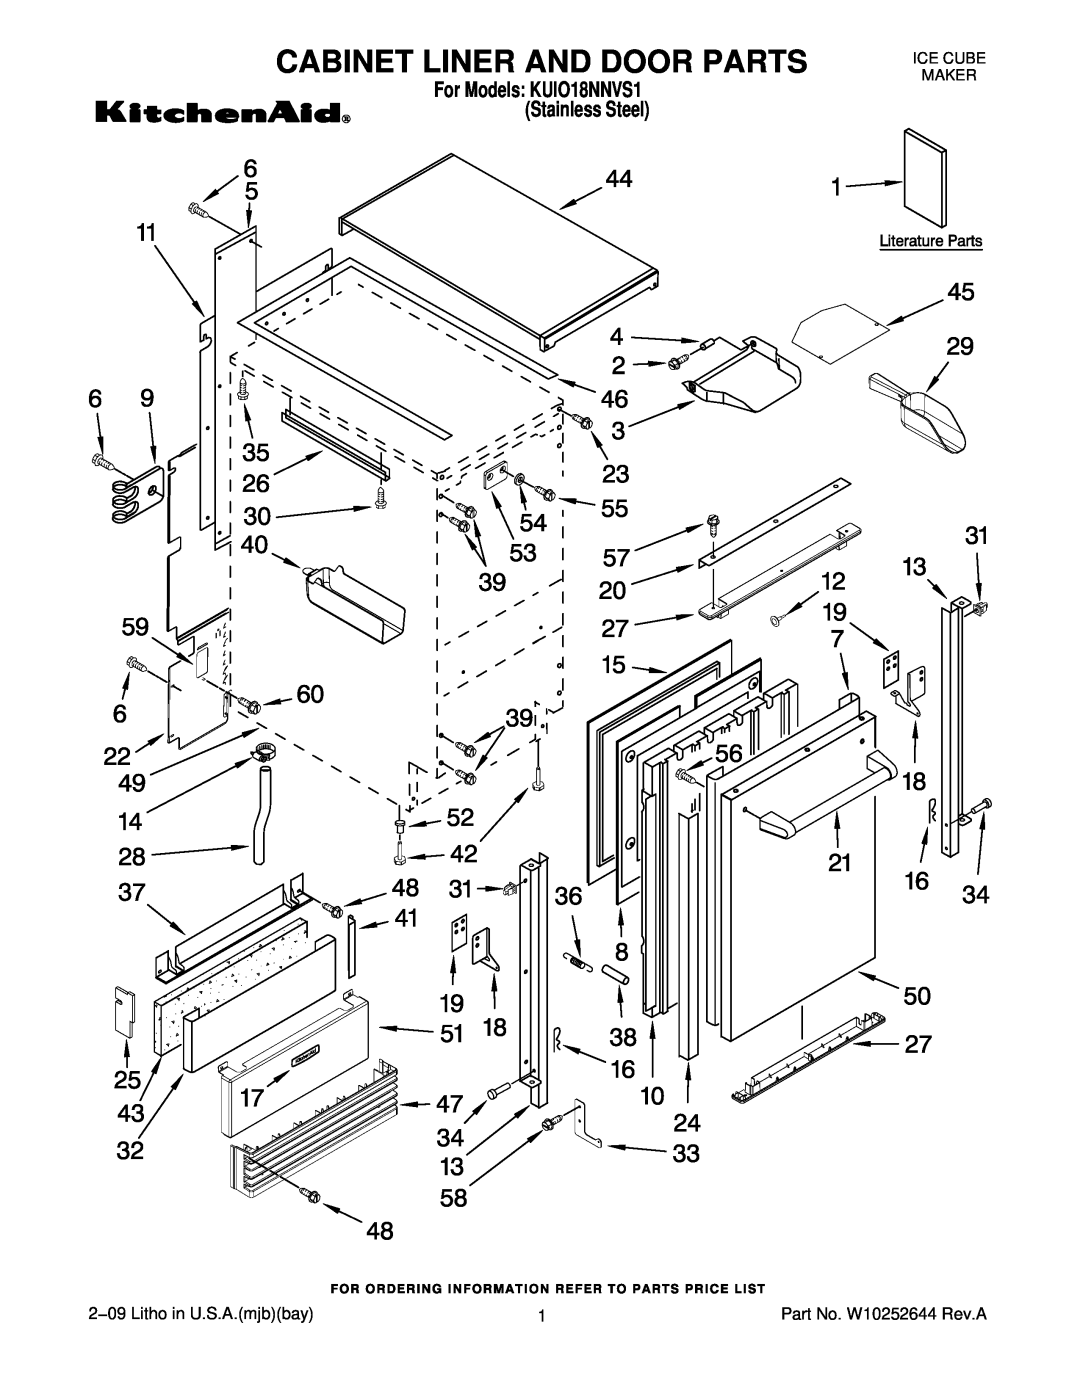 KitchenAid manual Cabinet Liner And Door Parts, For Models KUIO18NNVS1 Stainless Steel, Ice Cube Maker 